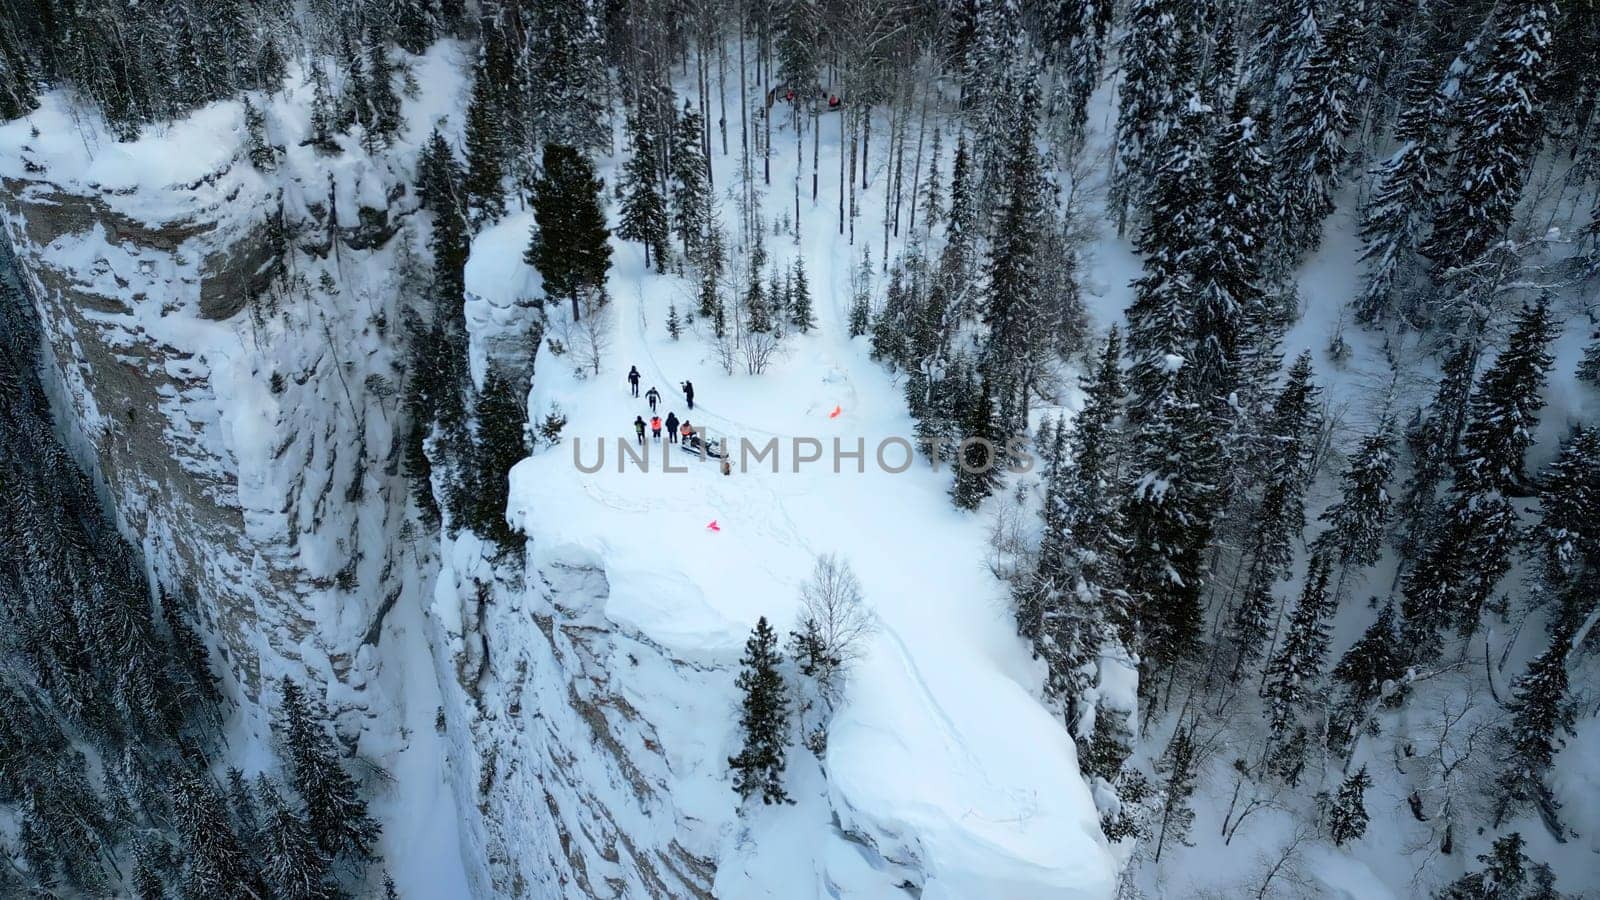 Winter mountain cliff covered by snow, ice, and fur trees. Clip. Stunning frozen winter nature, aerial view of tourists enjoying the day on the cliff edge. by Mediawhalestock